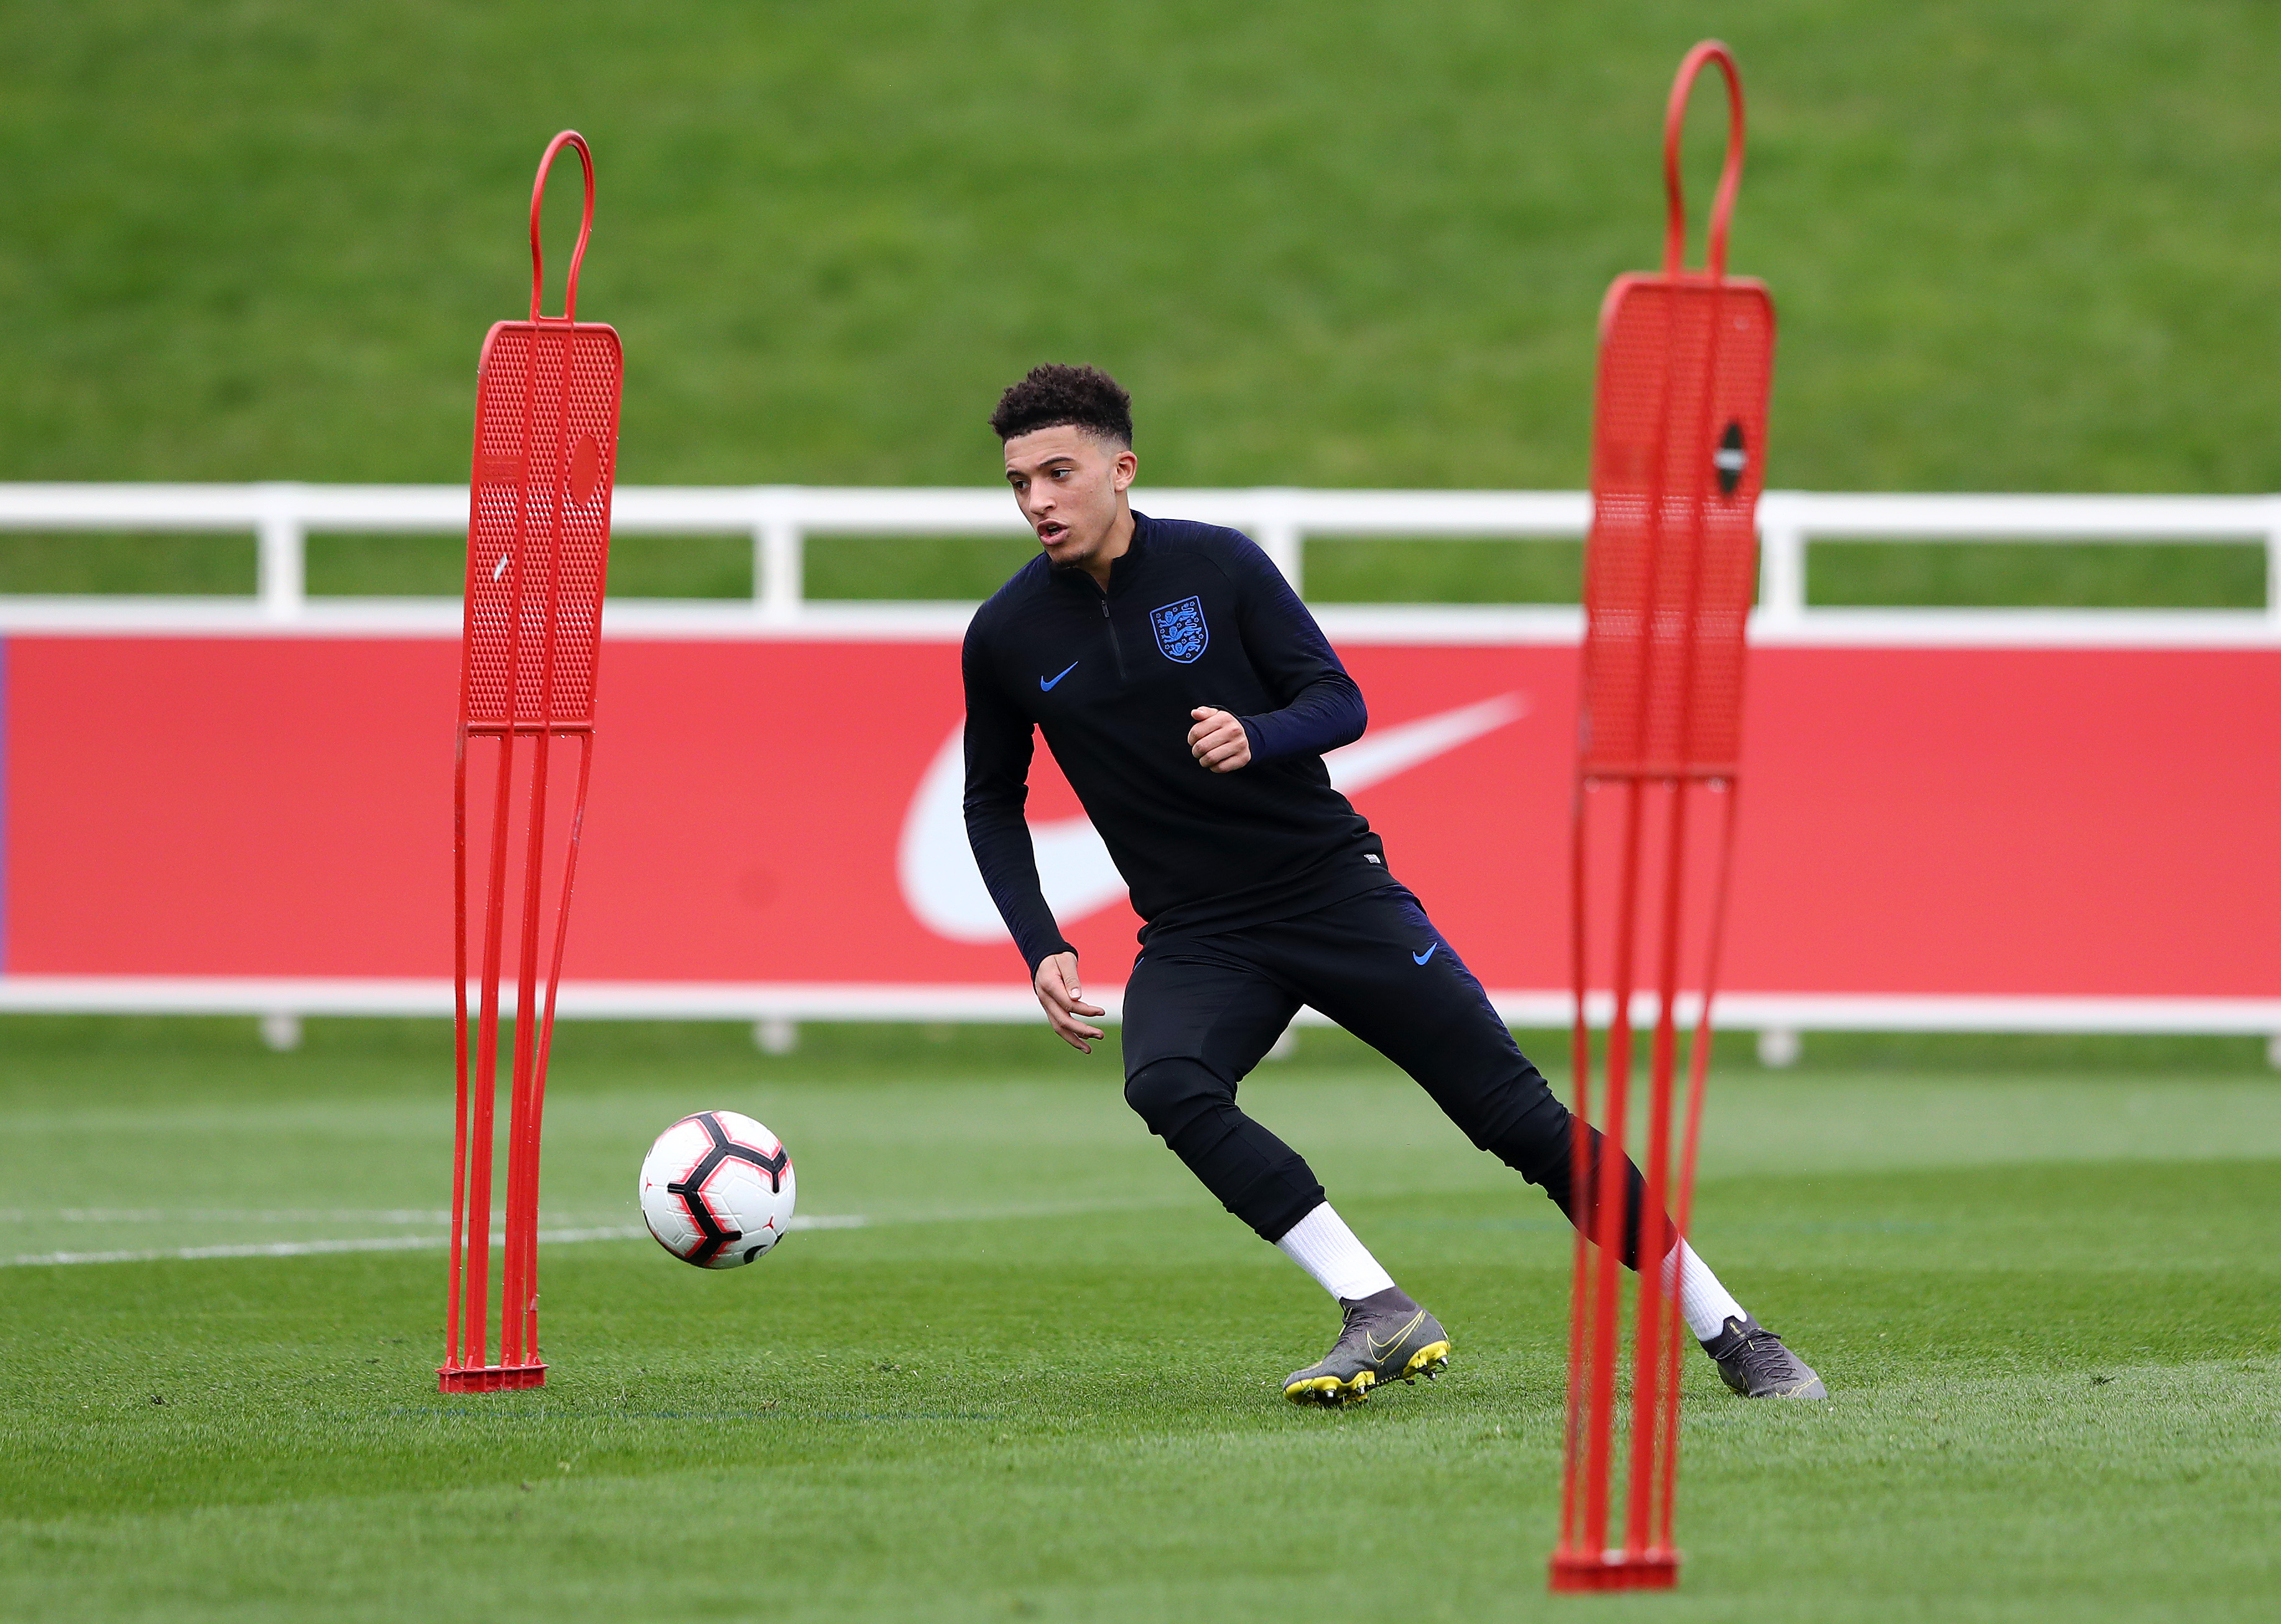 BURTON-UPON-TRENT, ENGLAND - MARCH 19:  Jadon Sancho of England in action during an England training session during an England Media Access day at St Georges Park on March 19, 2019 in Burton-upon-Trent, England. (Photo by Matthew Lewis/Getty Images)